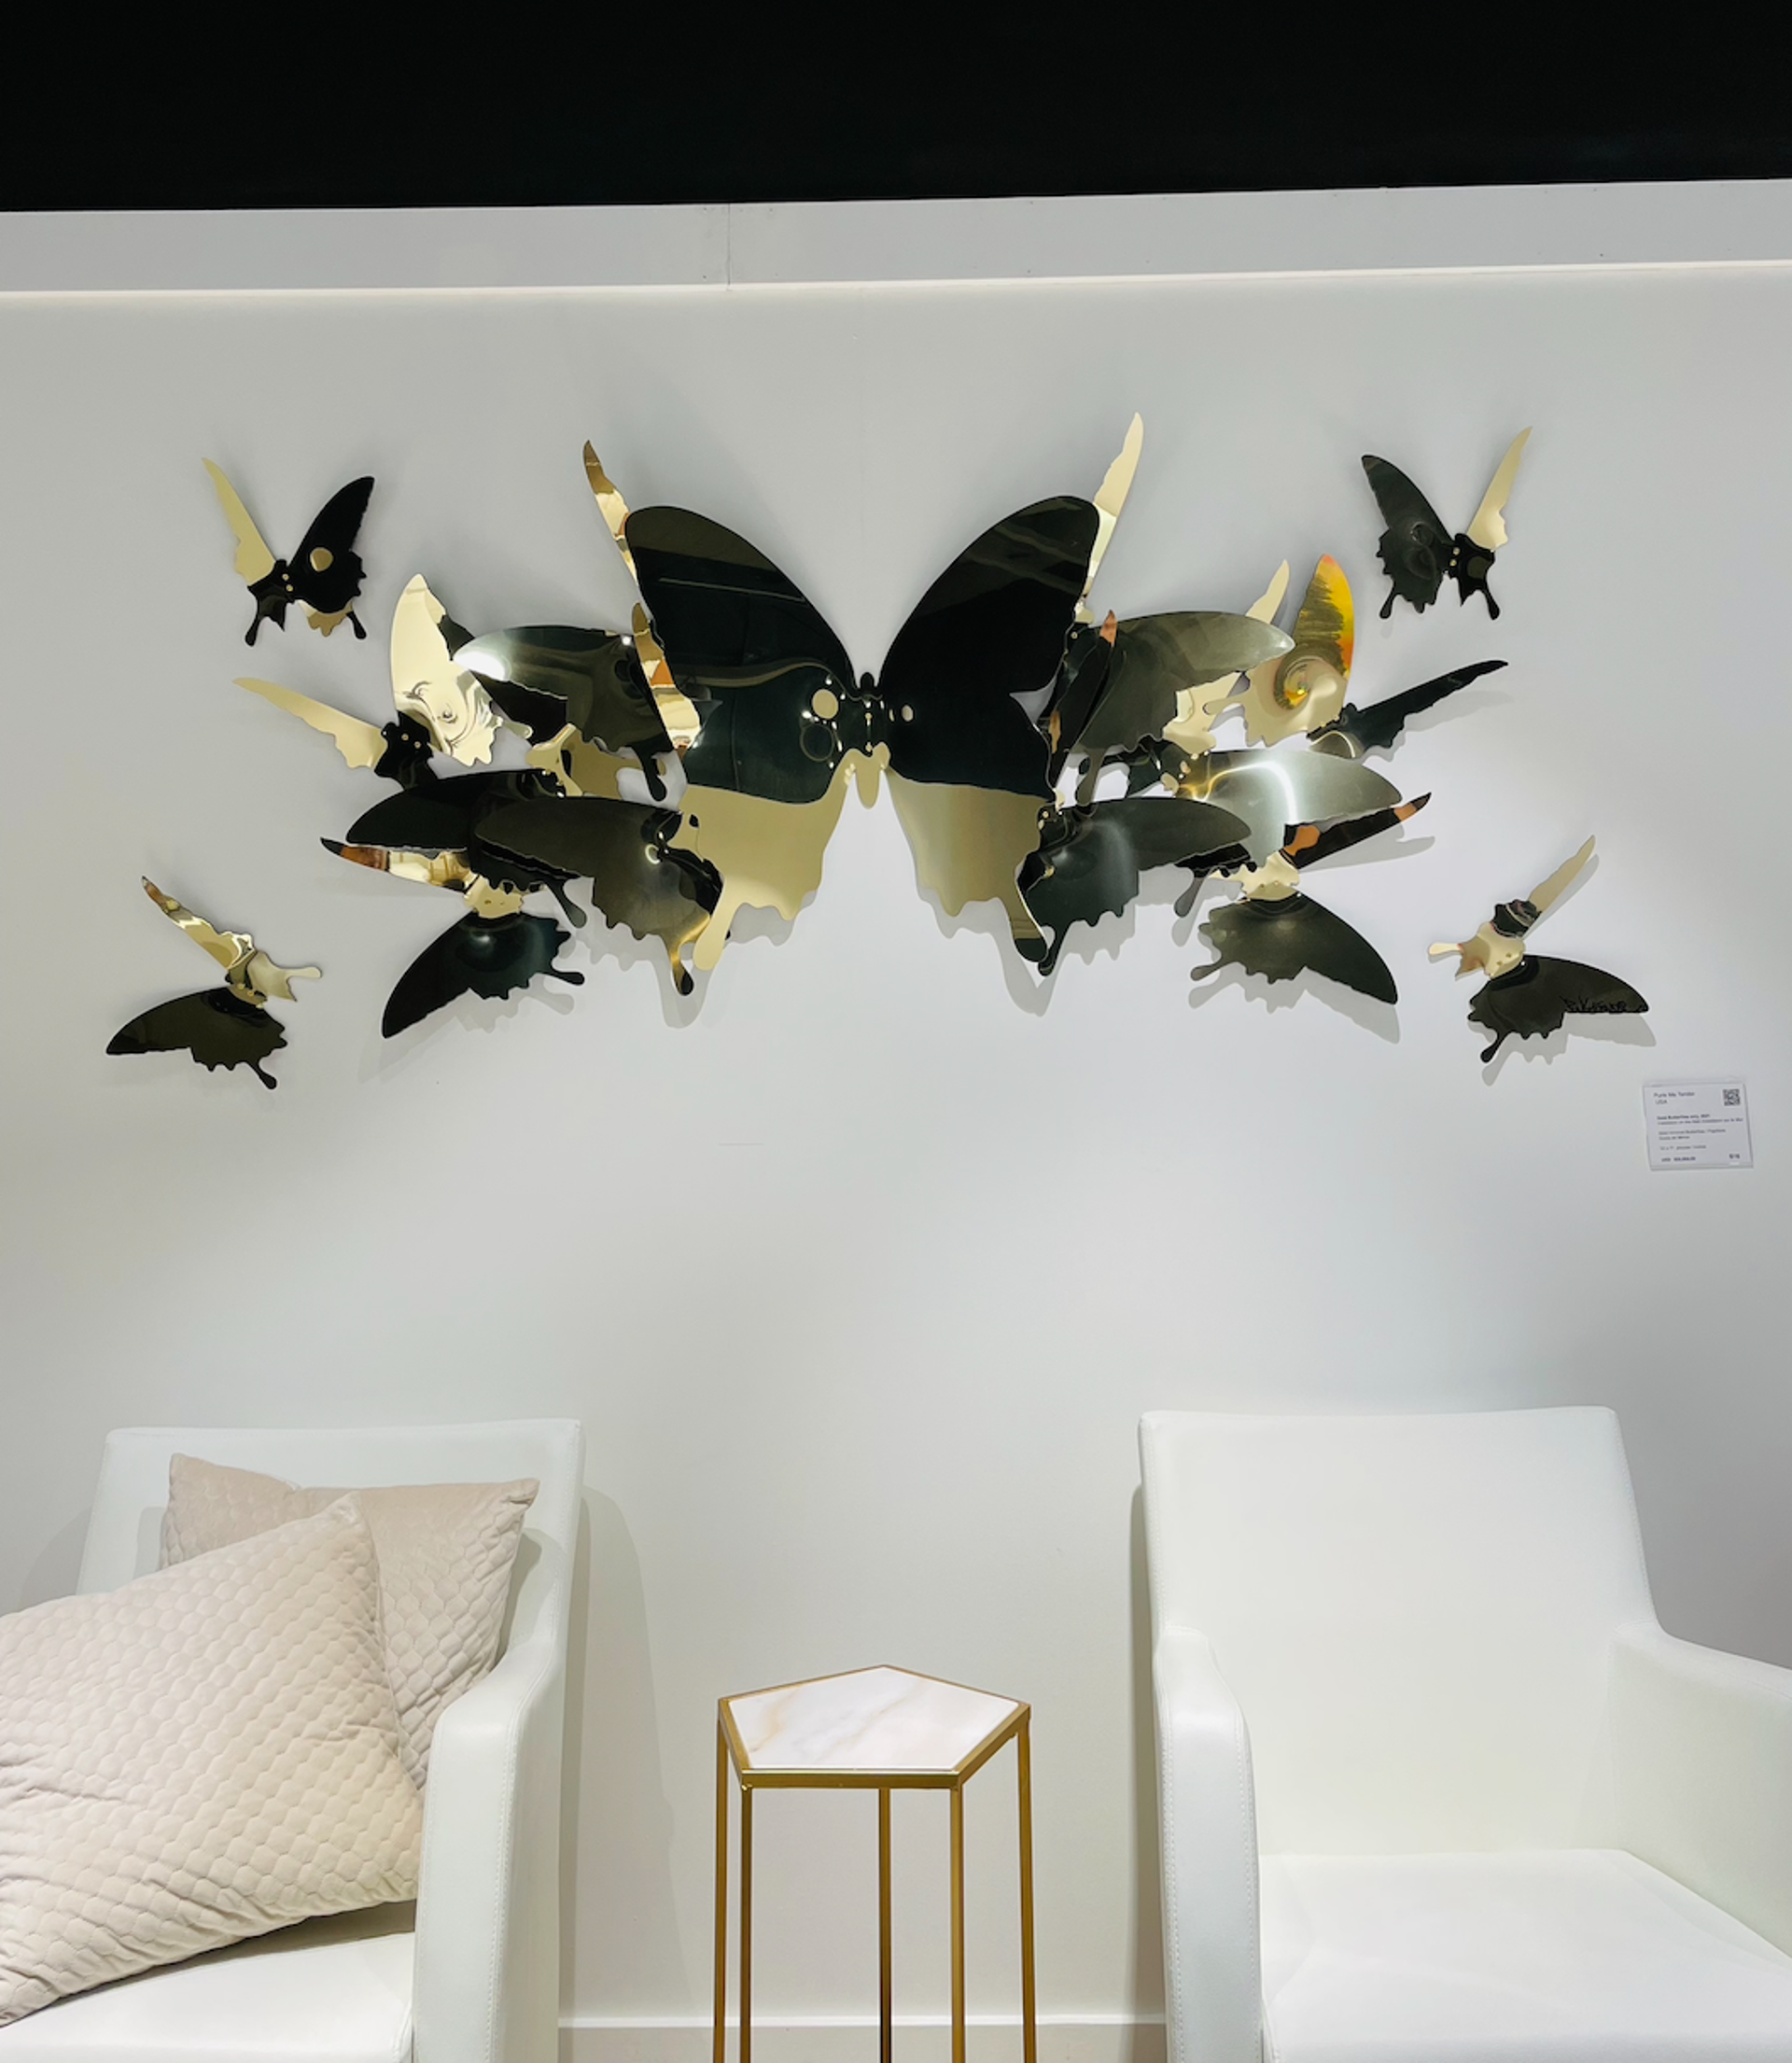 Installation on wall (Gold butterflies only) by PUNK ME TENDER